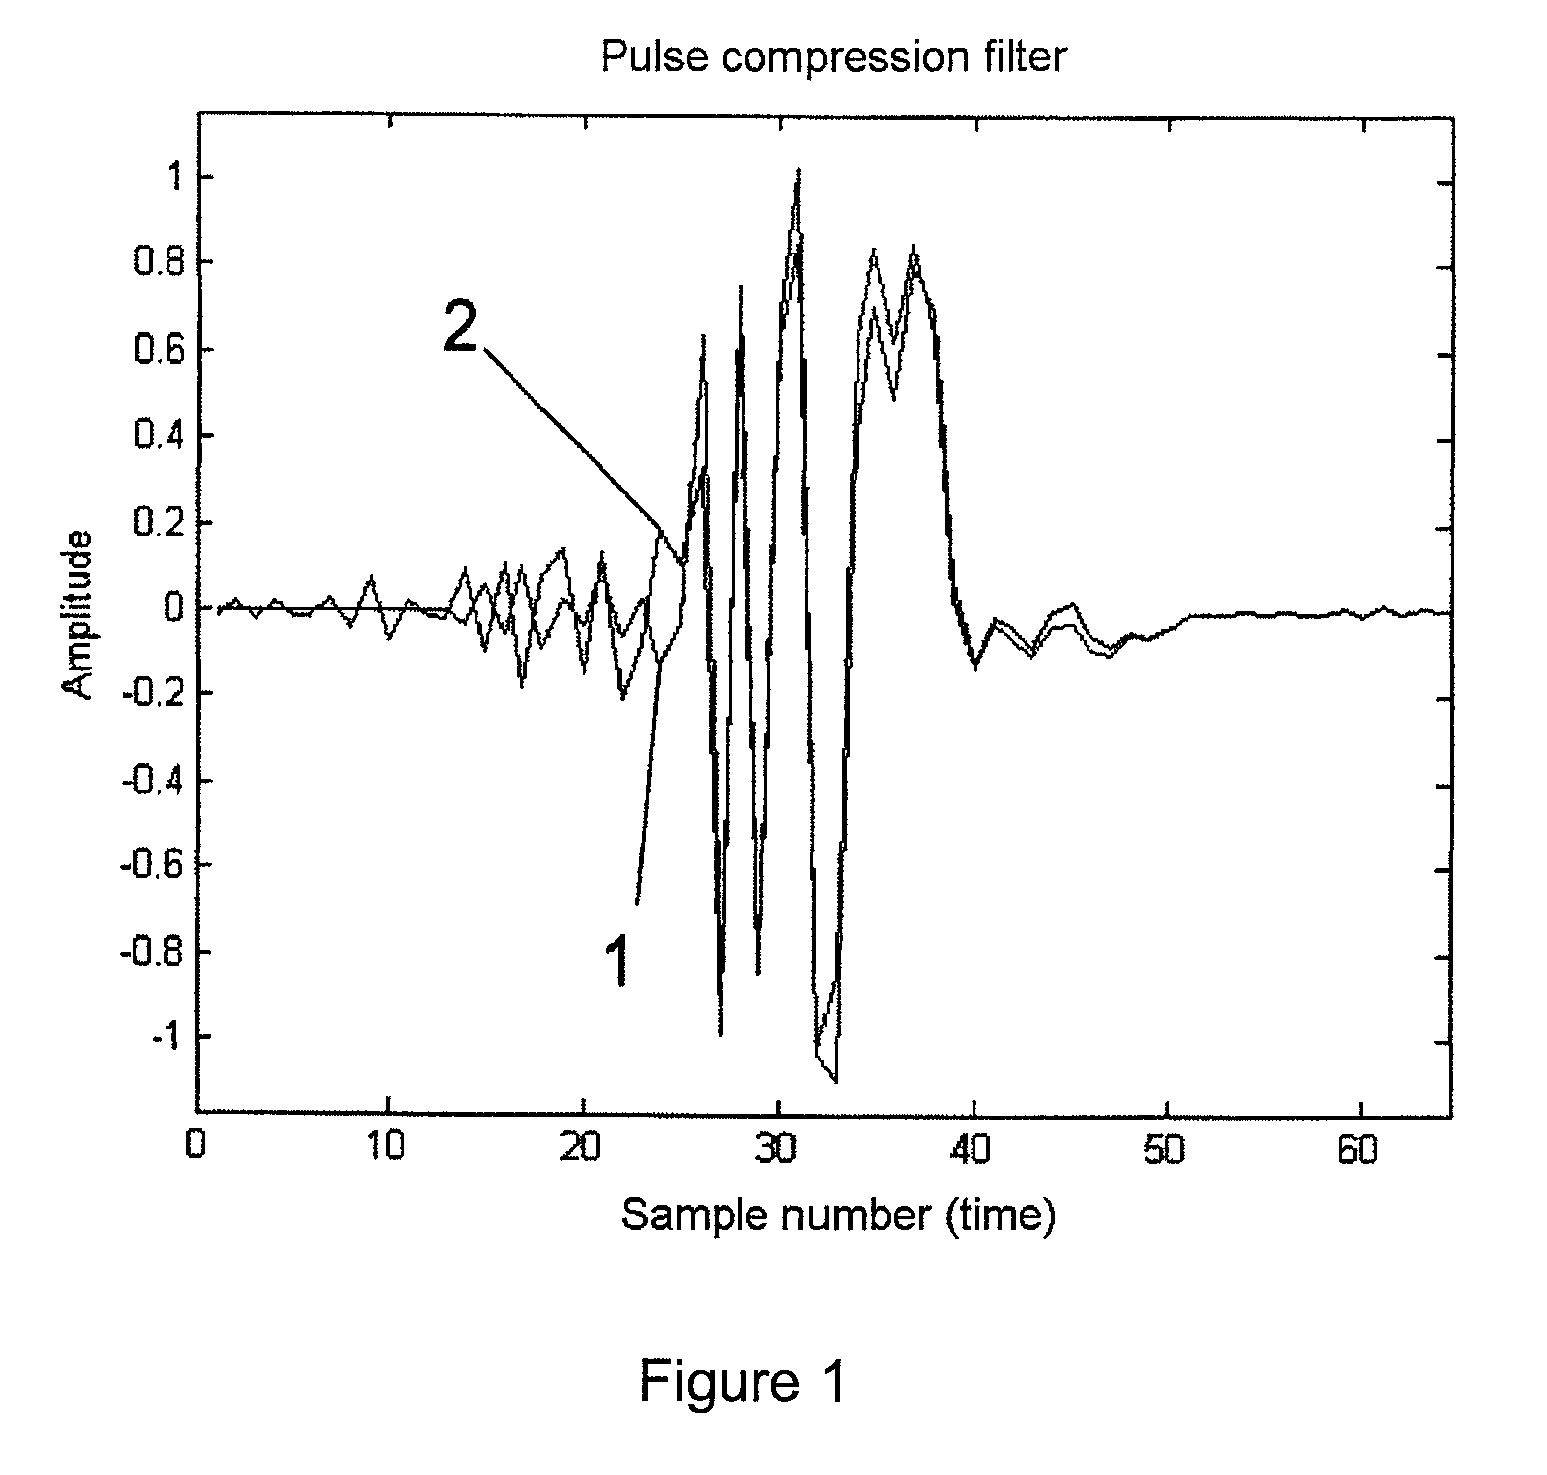 Adaptive calculation of pulse compression filter coefficients for a radar signal